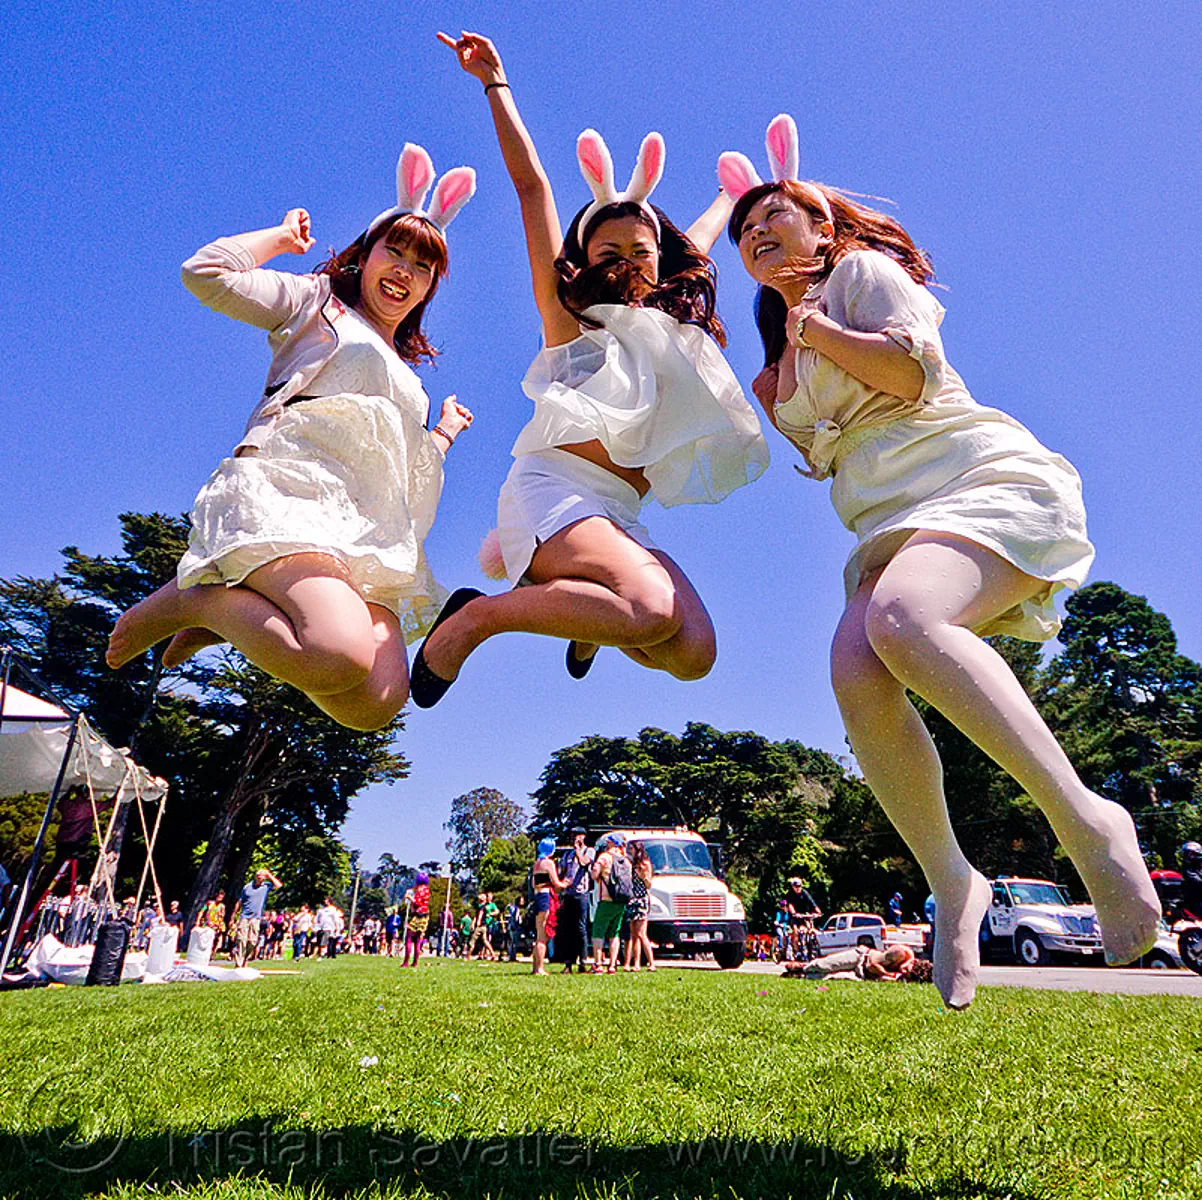 jumping bunny girls - bay to breakers footrace and street party (san francisco)-, bay to breakers, bunnies, bunny ears, footrace, golden gate park, japanese, jump, jumpshot, lawn, street party, women